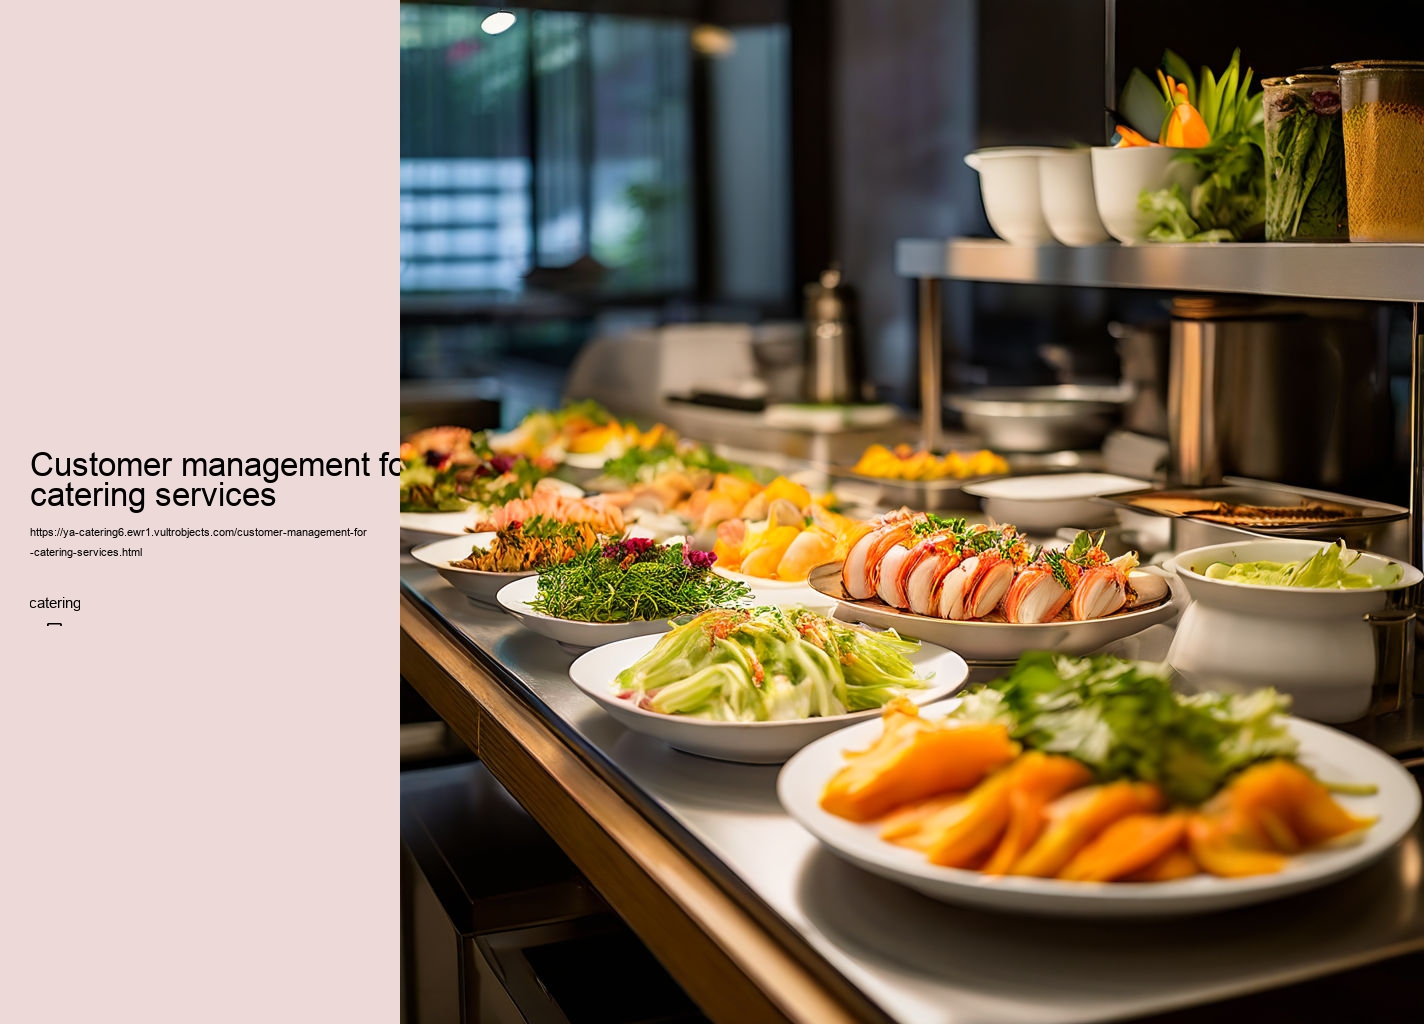 Customer management for catering services